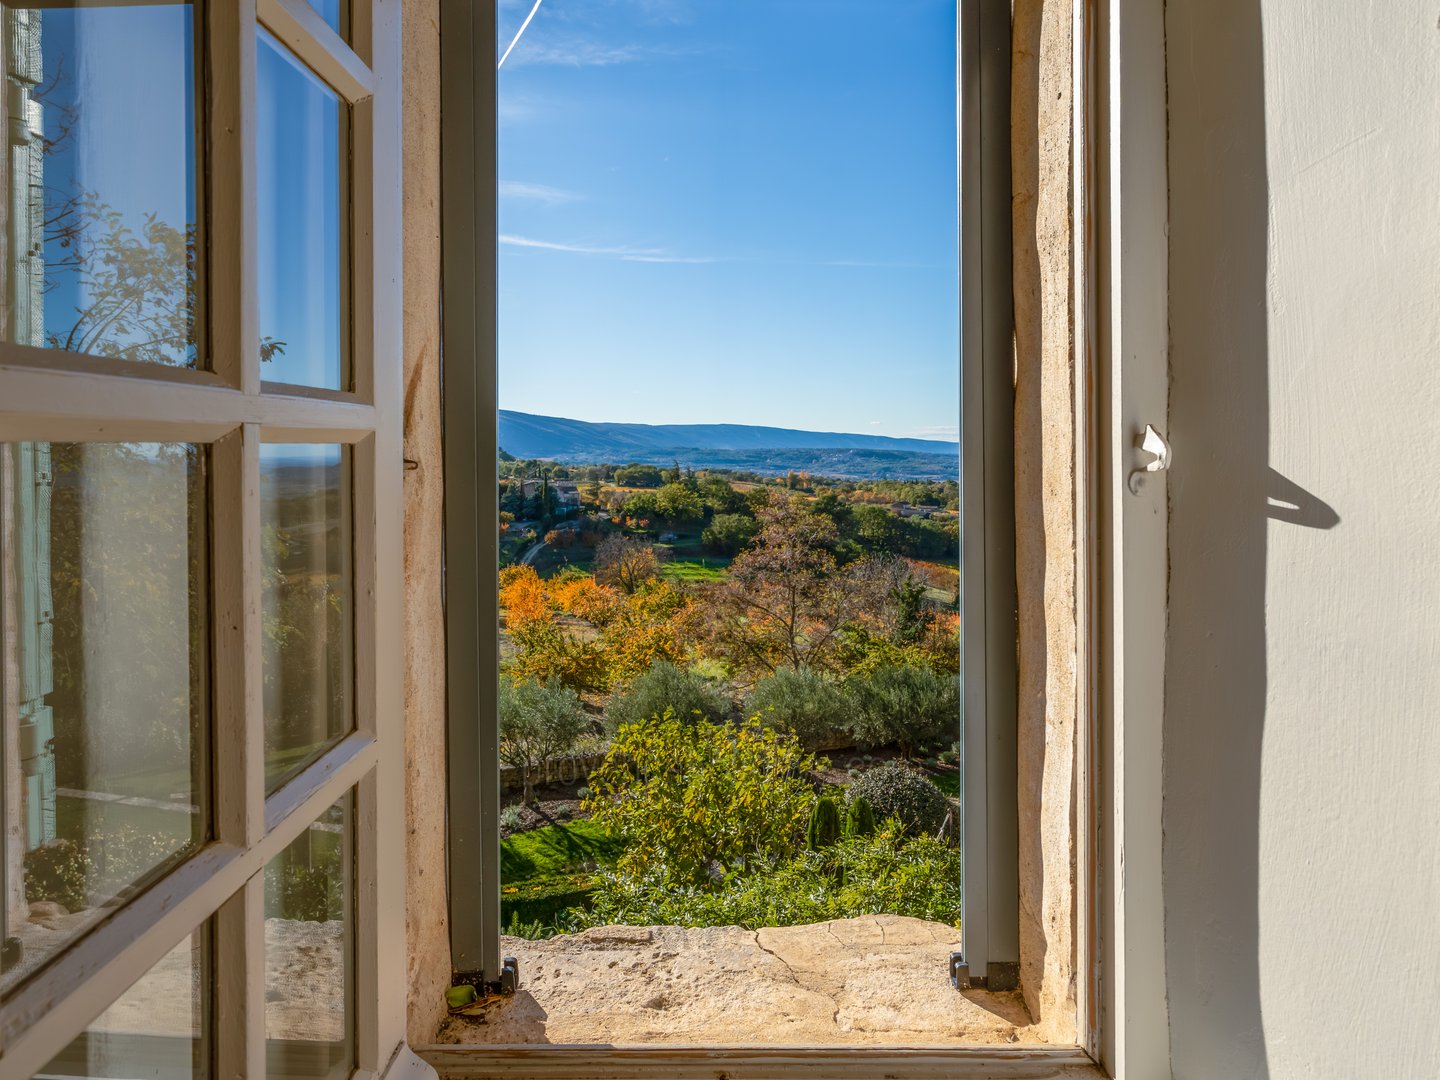 18th century Bastide with views of Luberon for sale - Bonnieux - 42